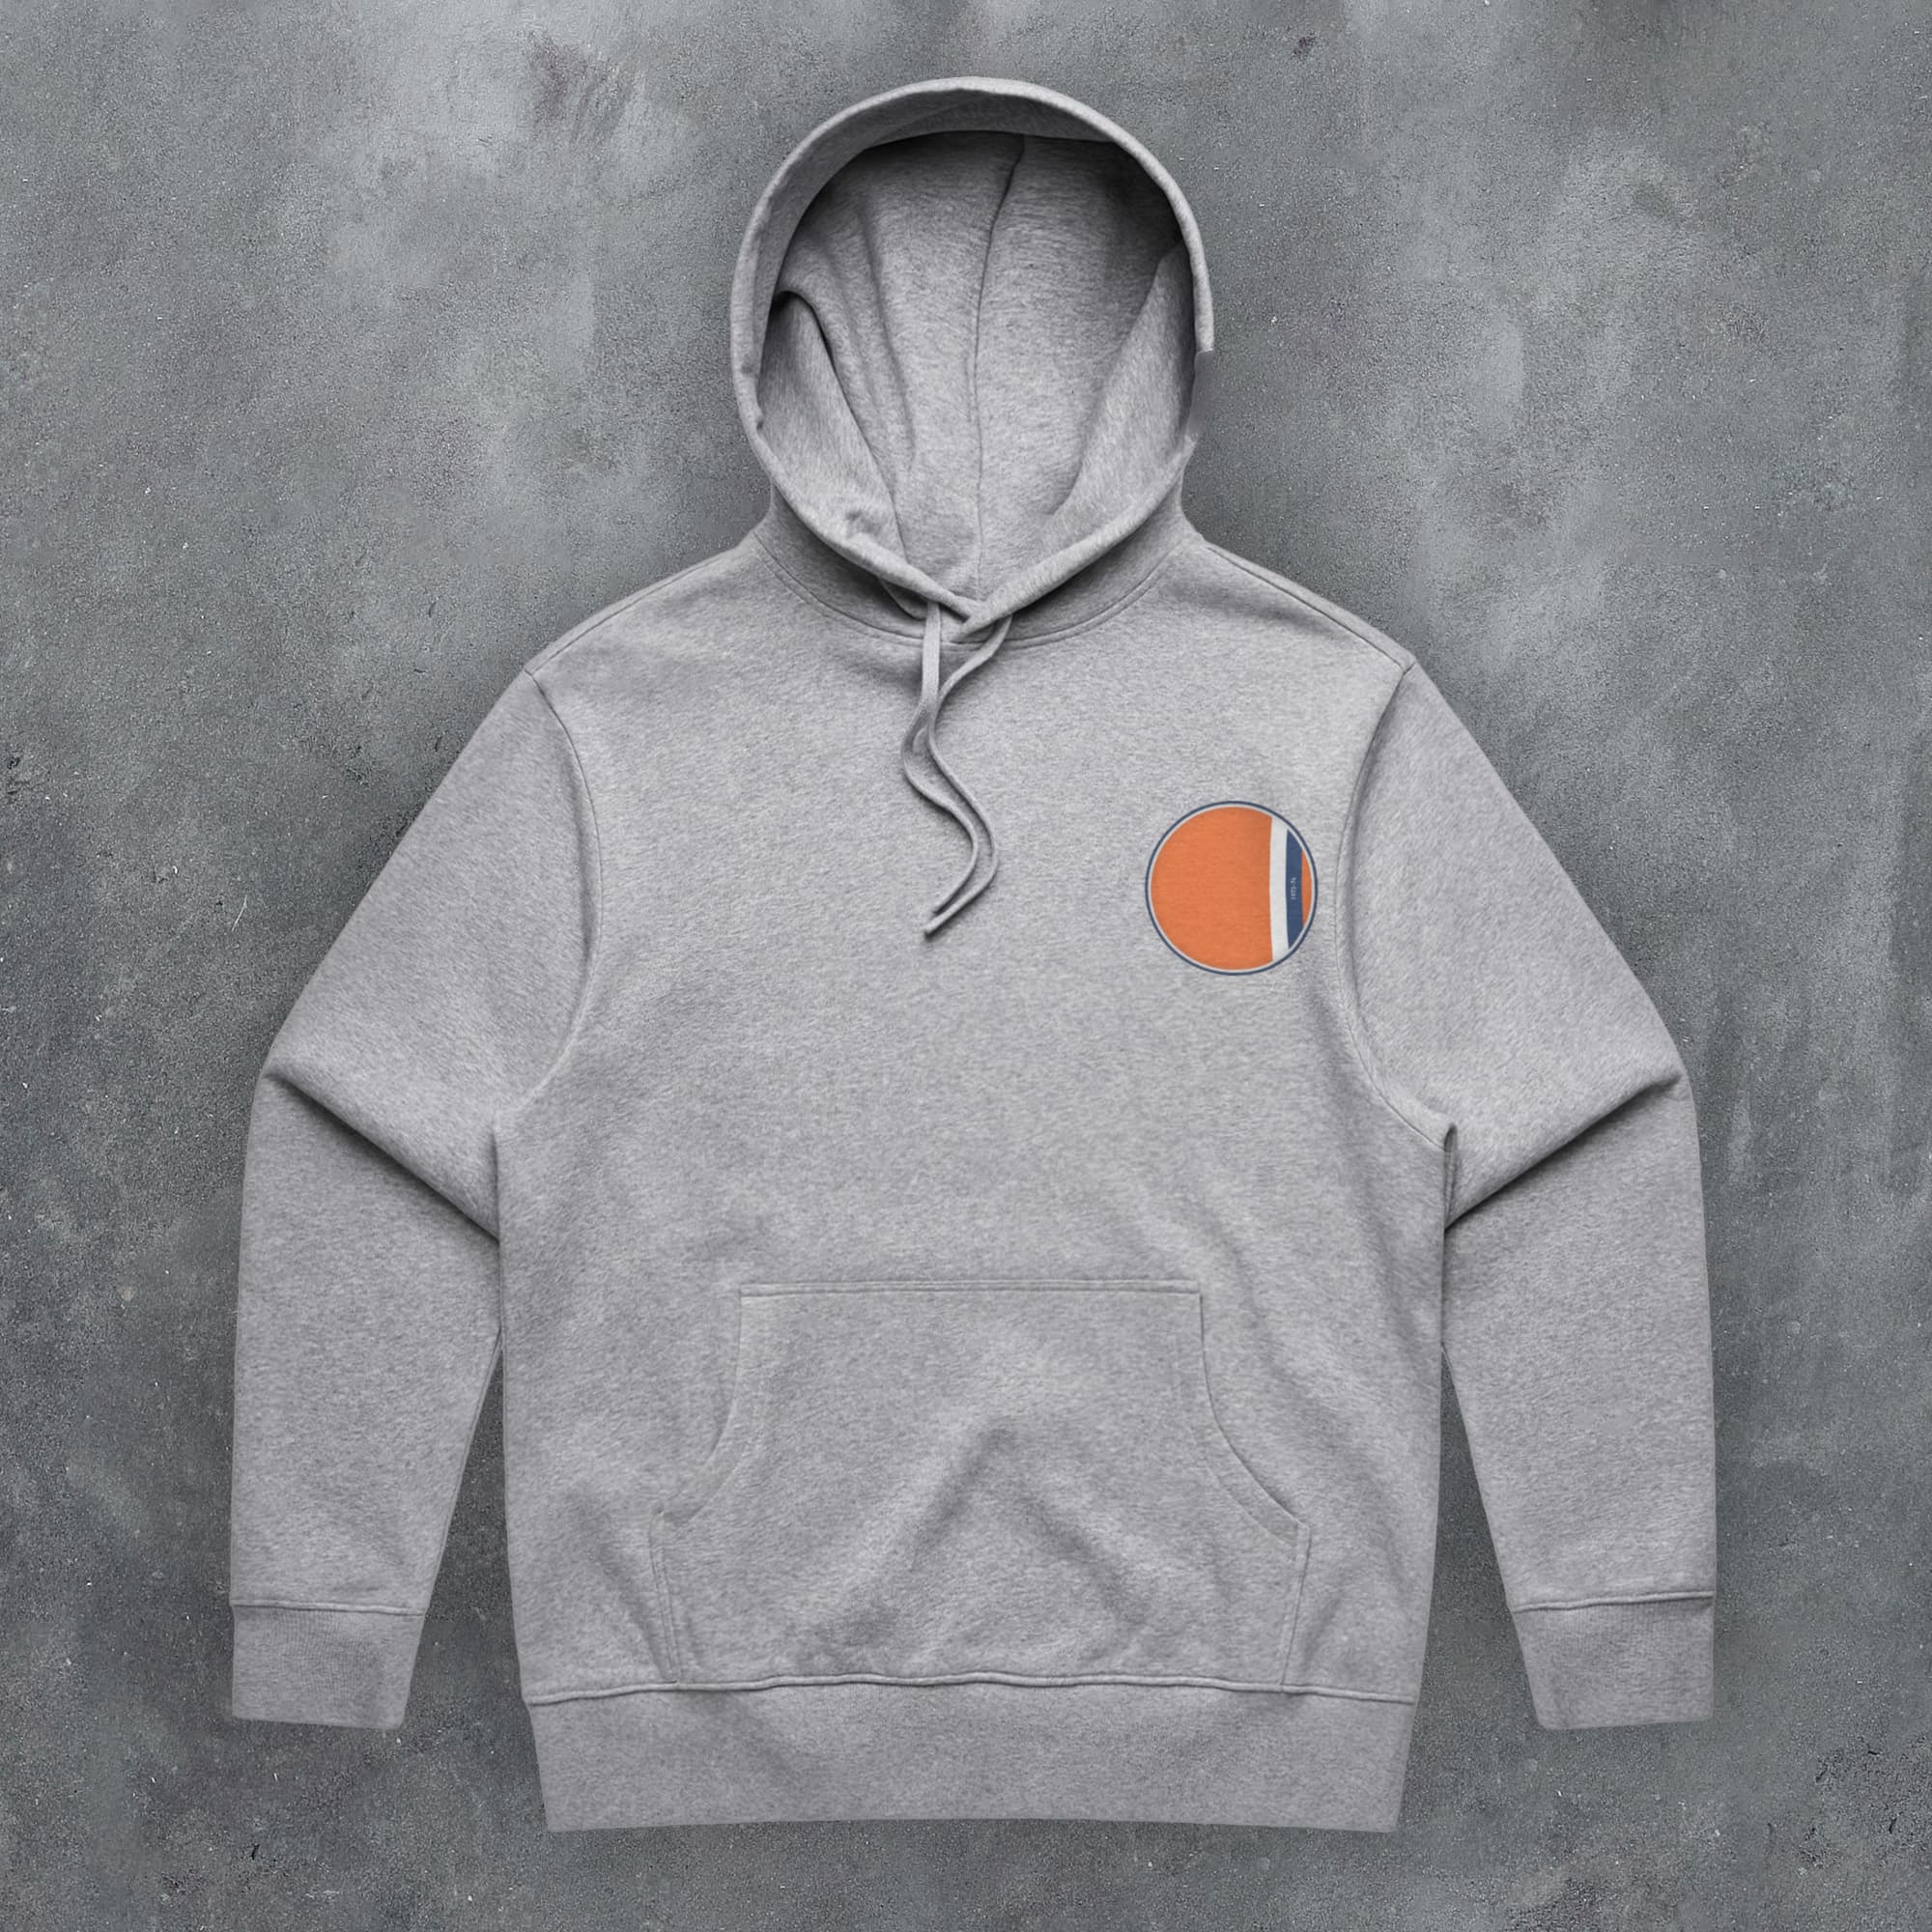 a grey hoodie with an orange circle on it